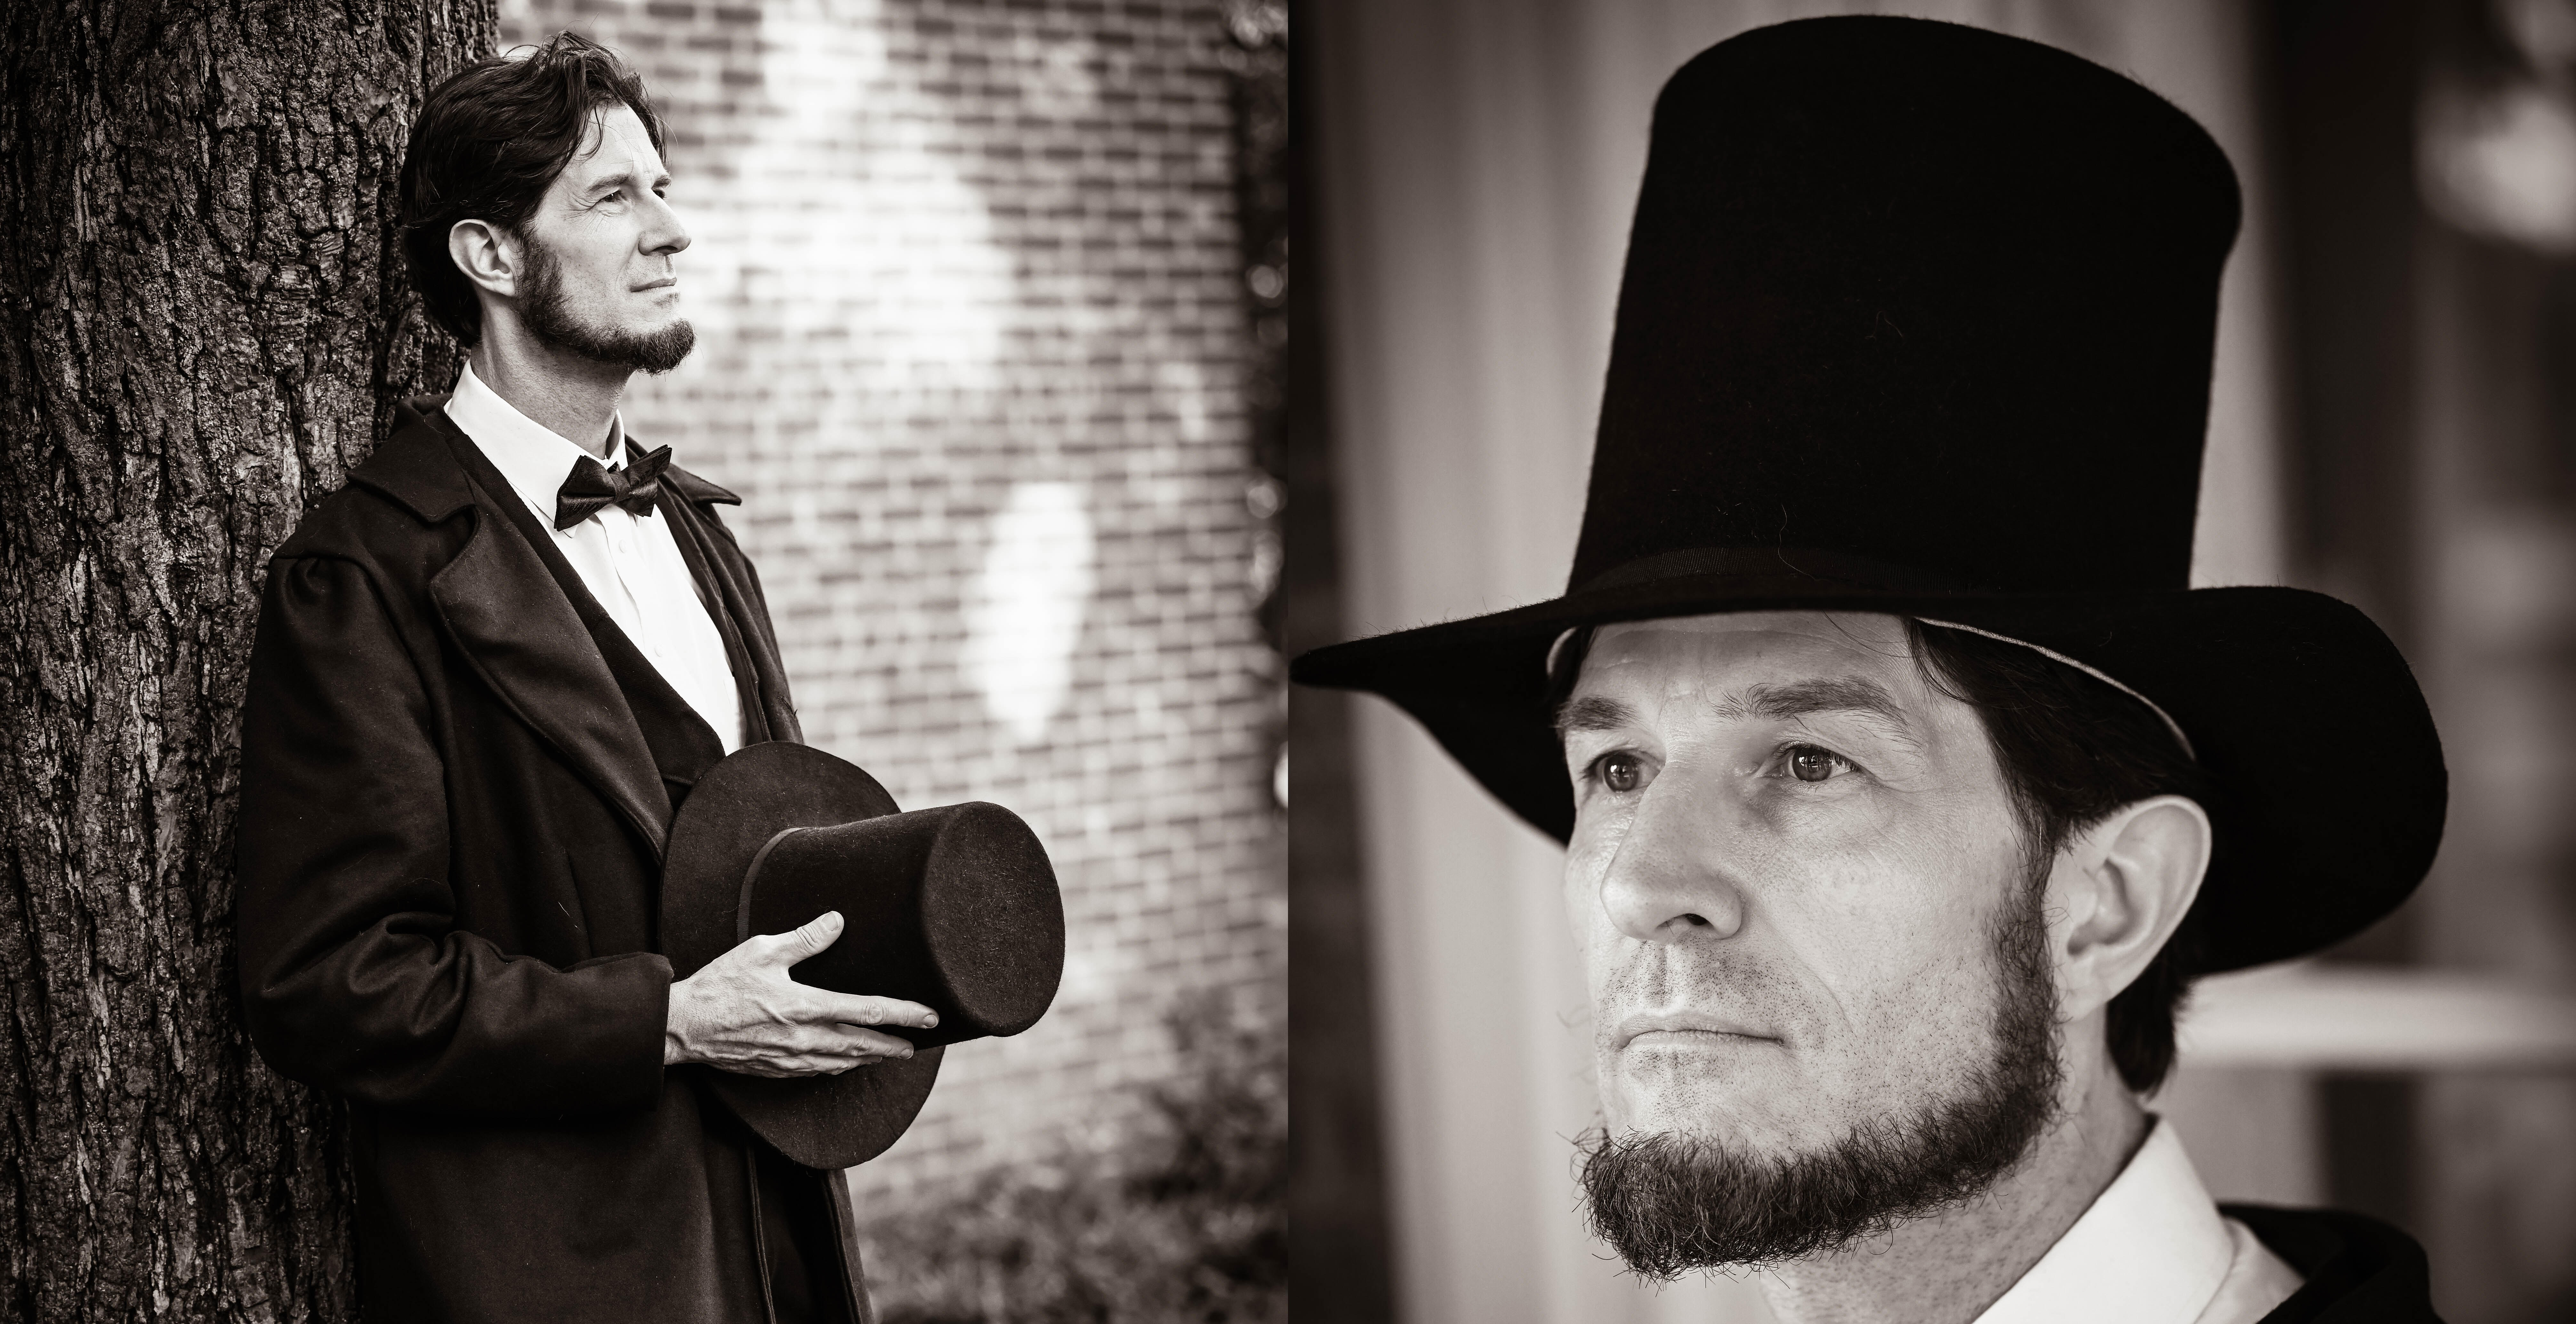 An Evening With Abraham Lincoln